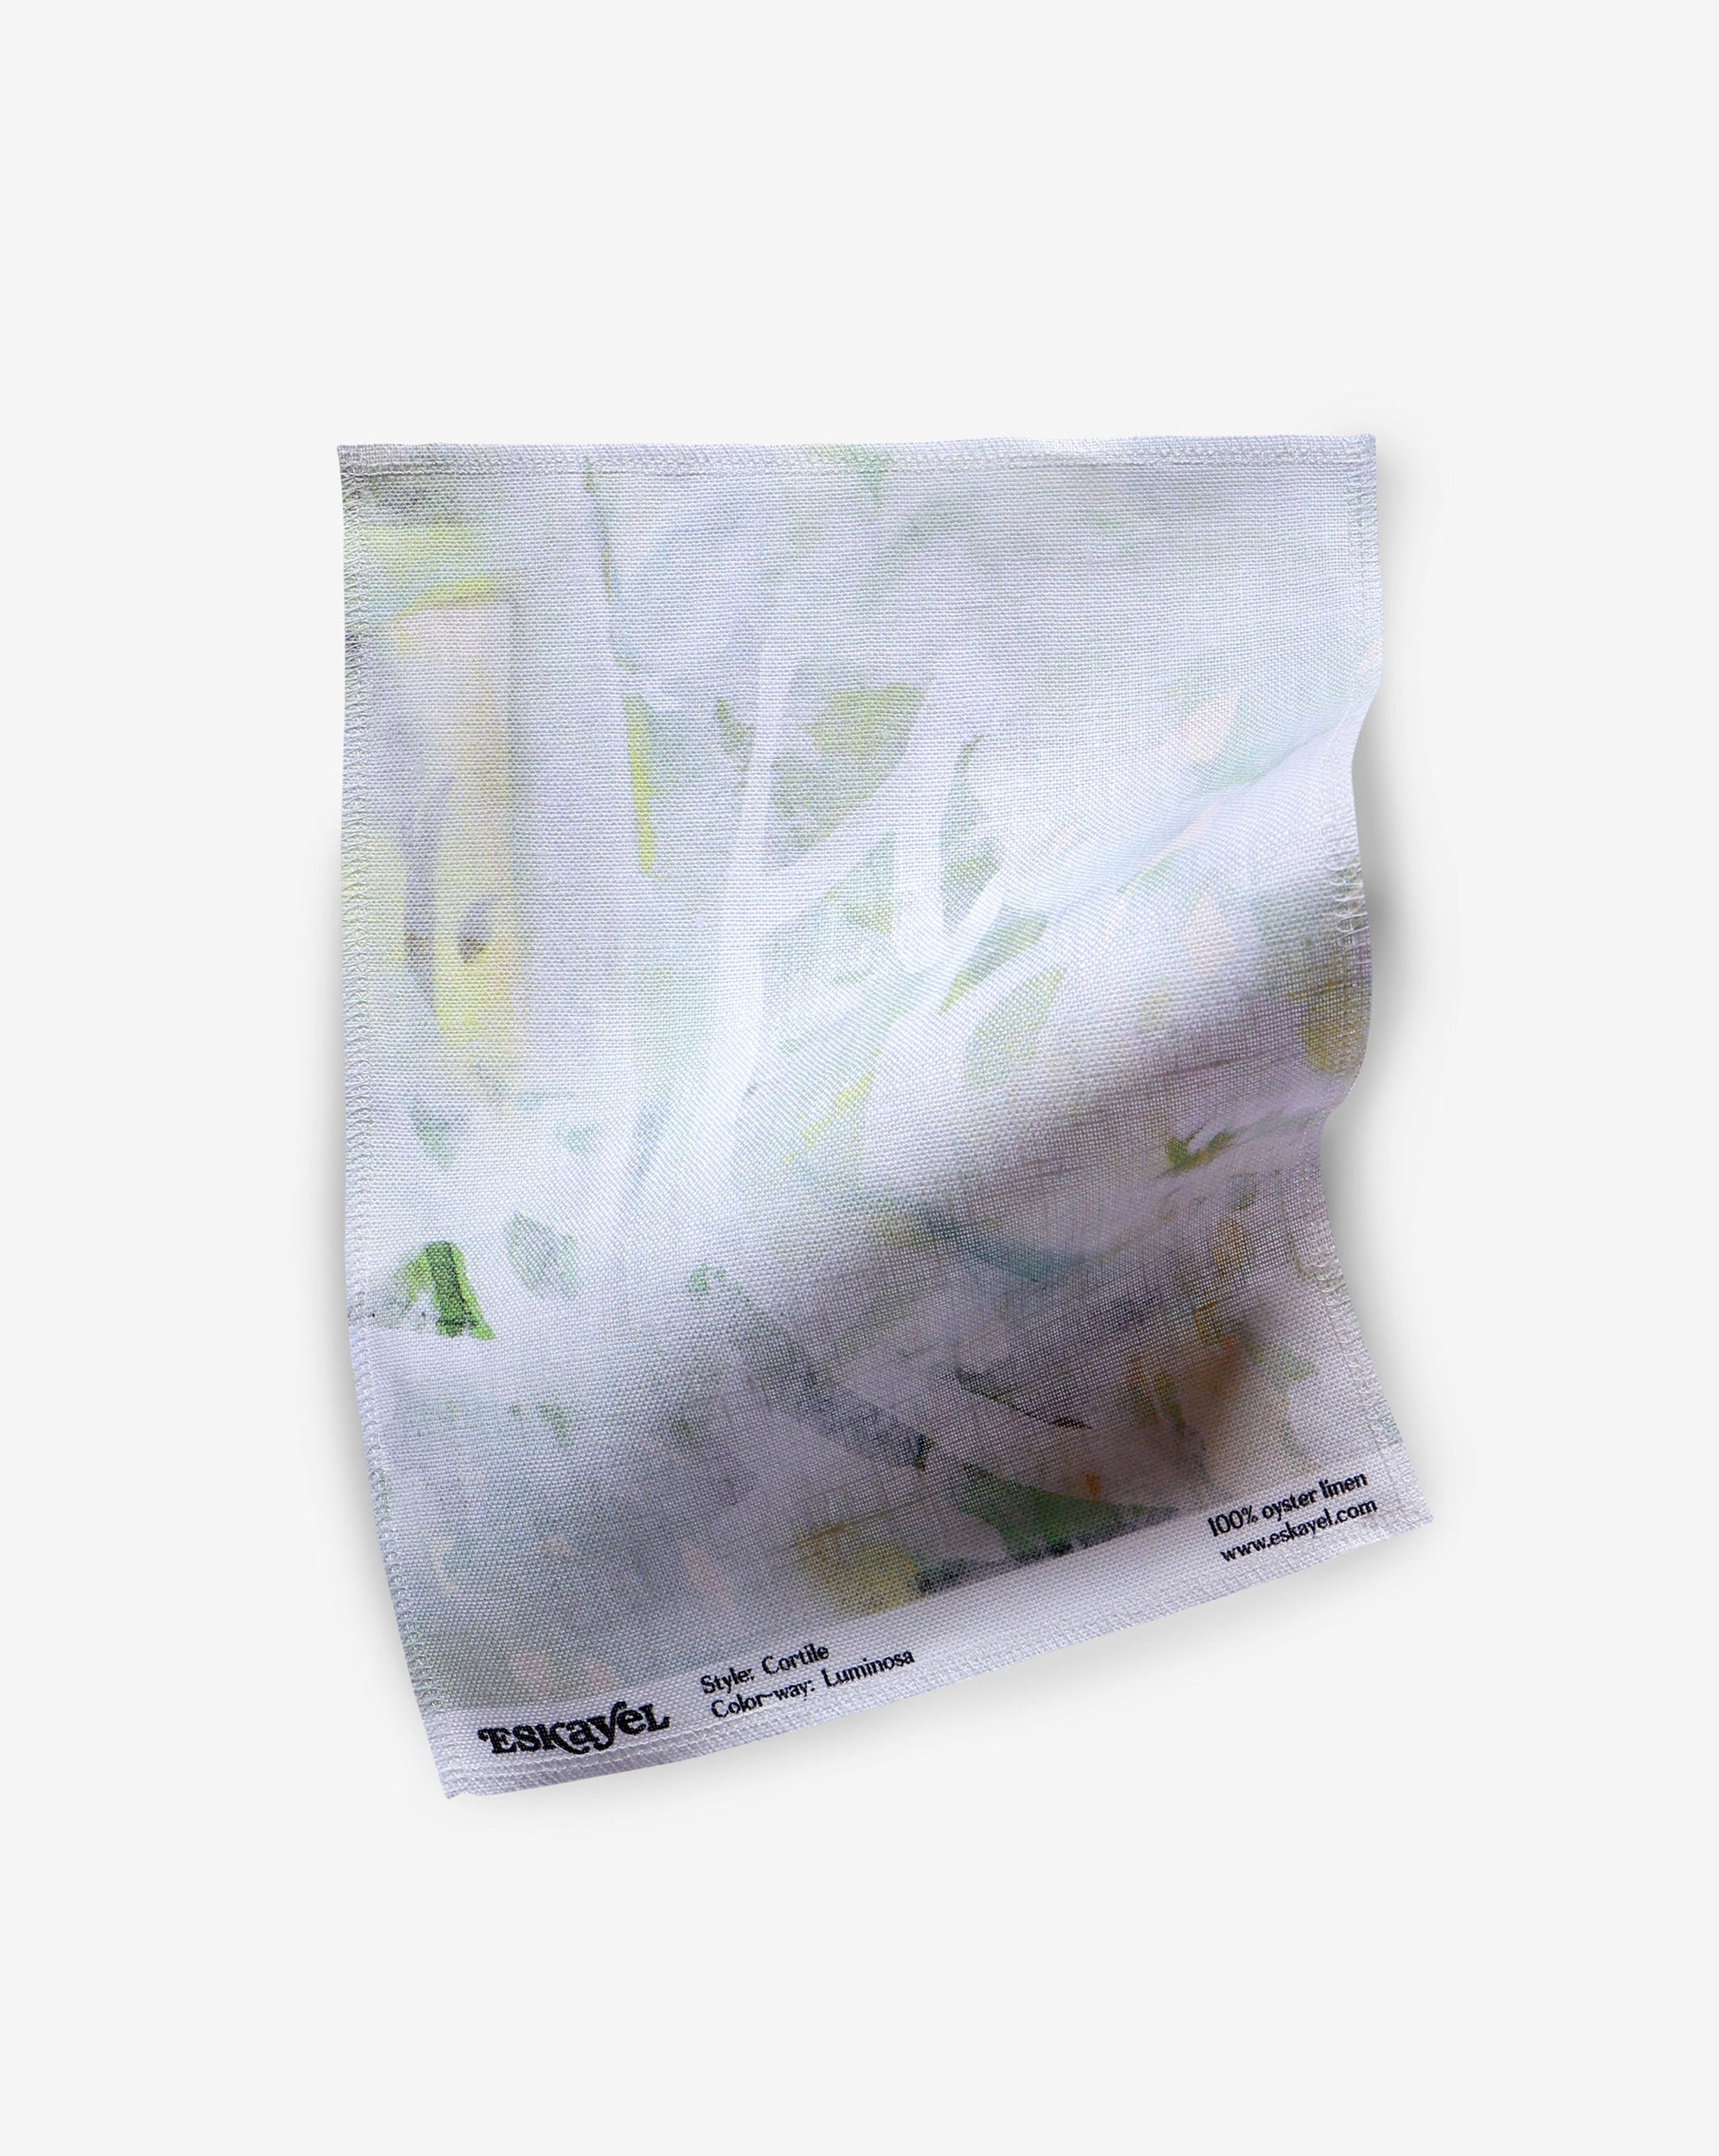 A piece of Cortile Fabric Luminosa with white and green paint on it